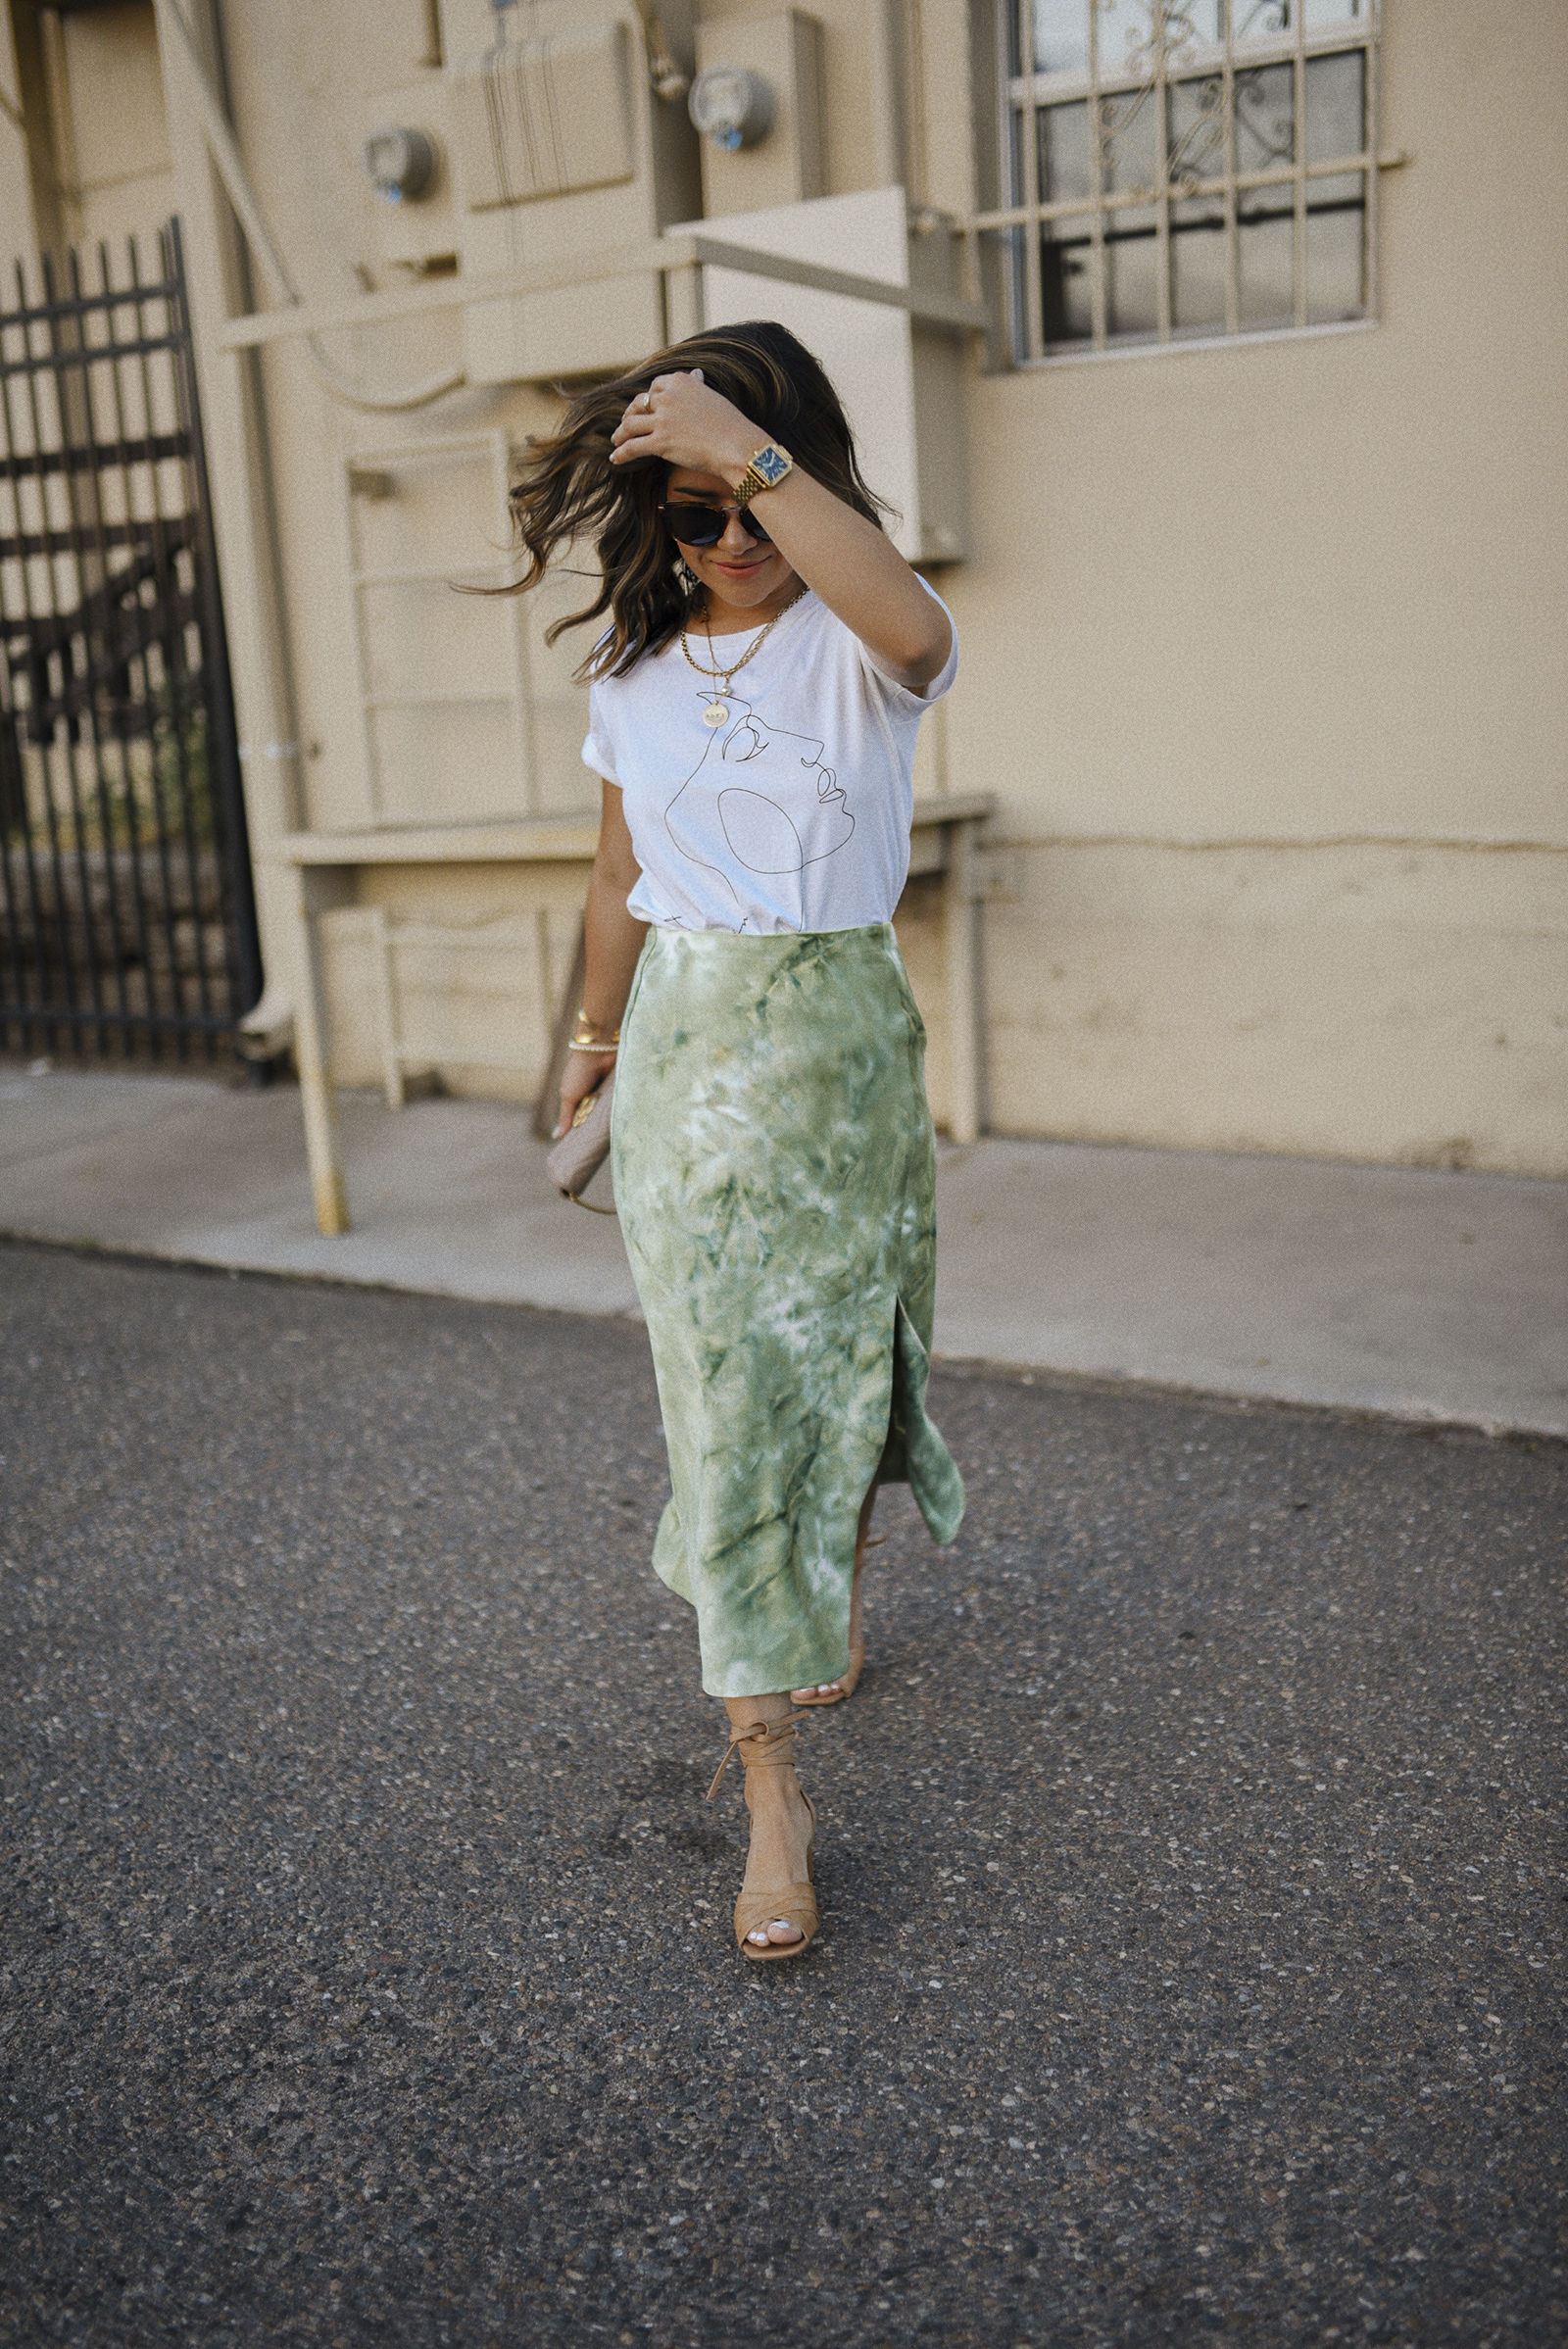 Carolina Hellal of Chic Talk wearing a Lucy Paris graphic tee, tie dye midi skirt, marc fisher sandals and Raen sunglasses.